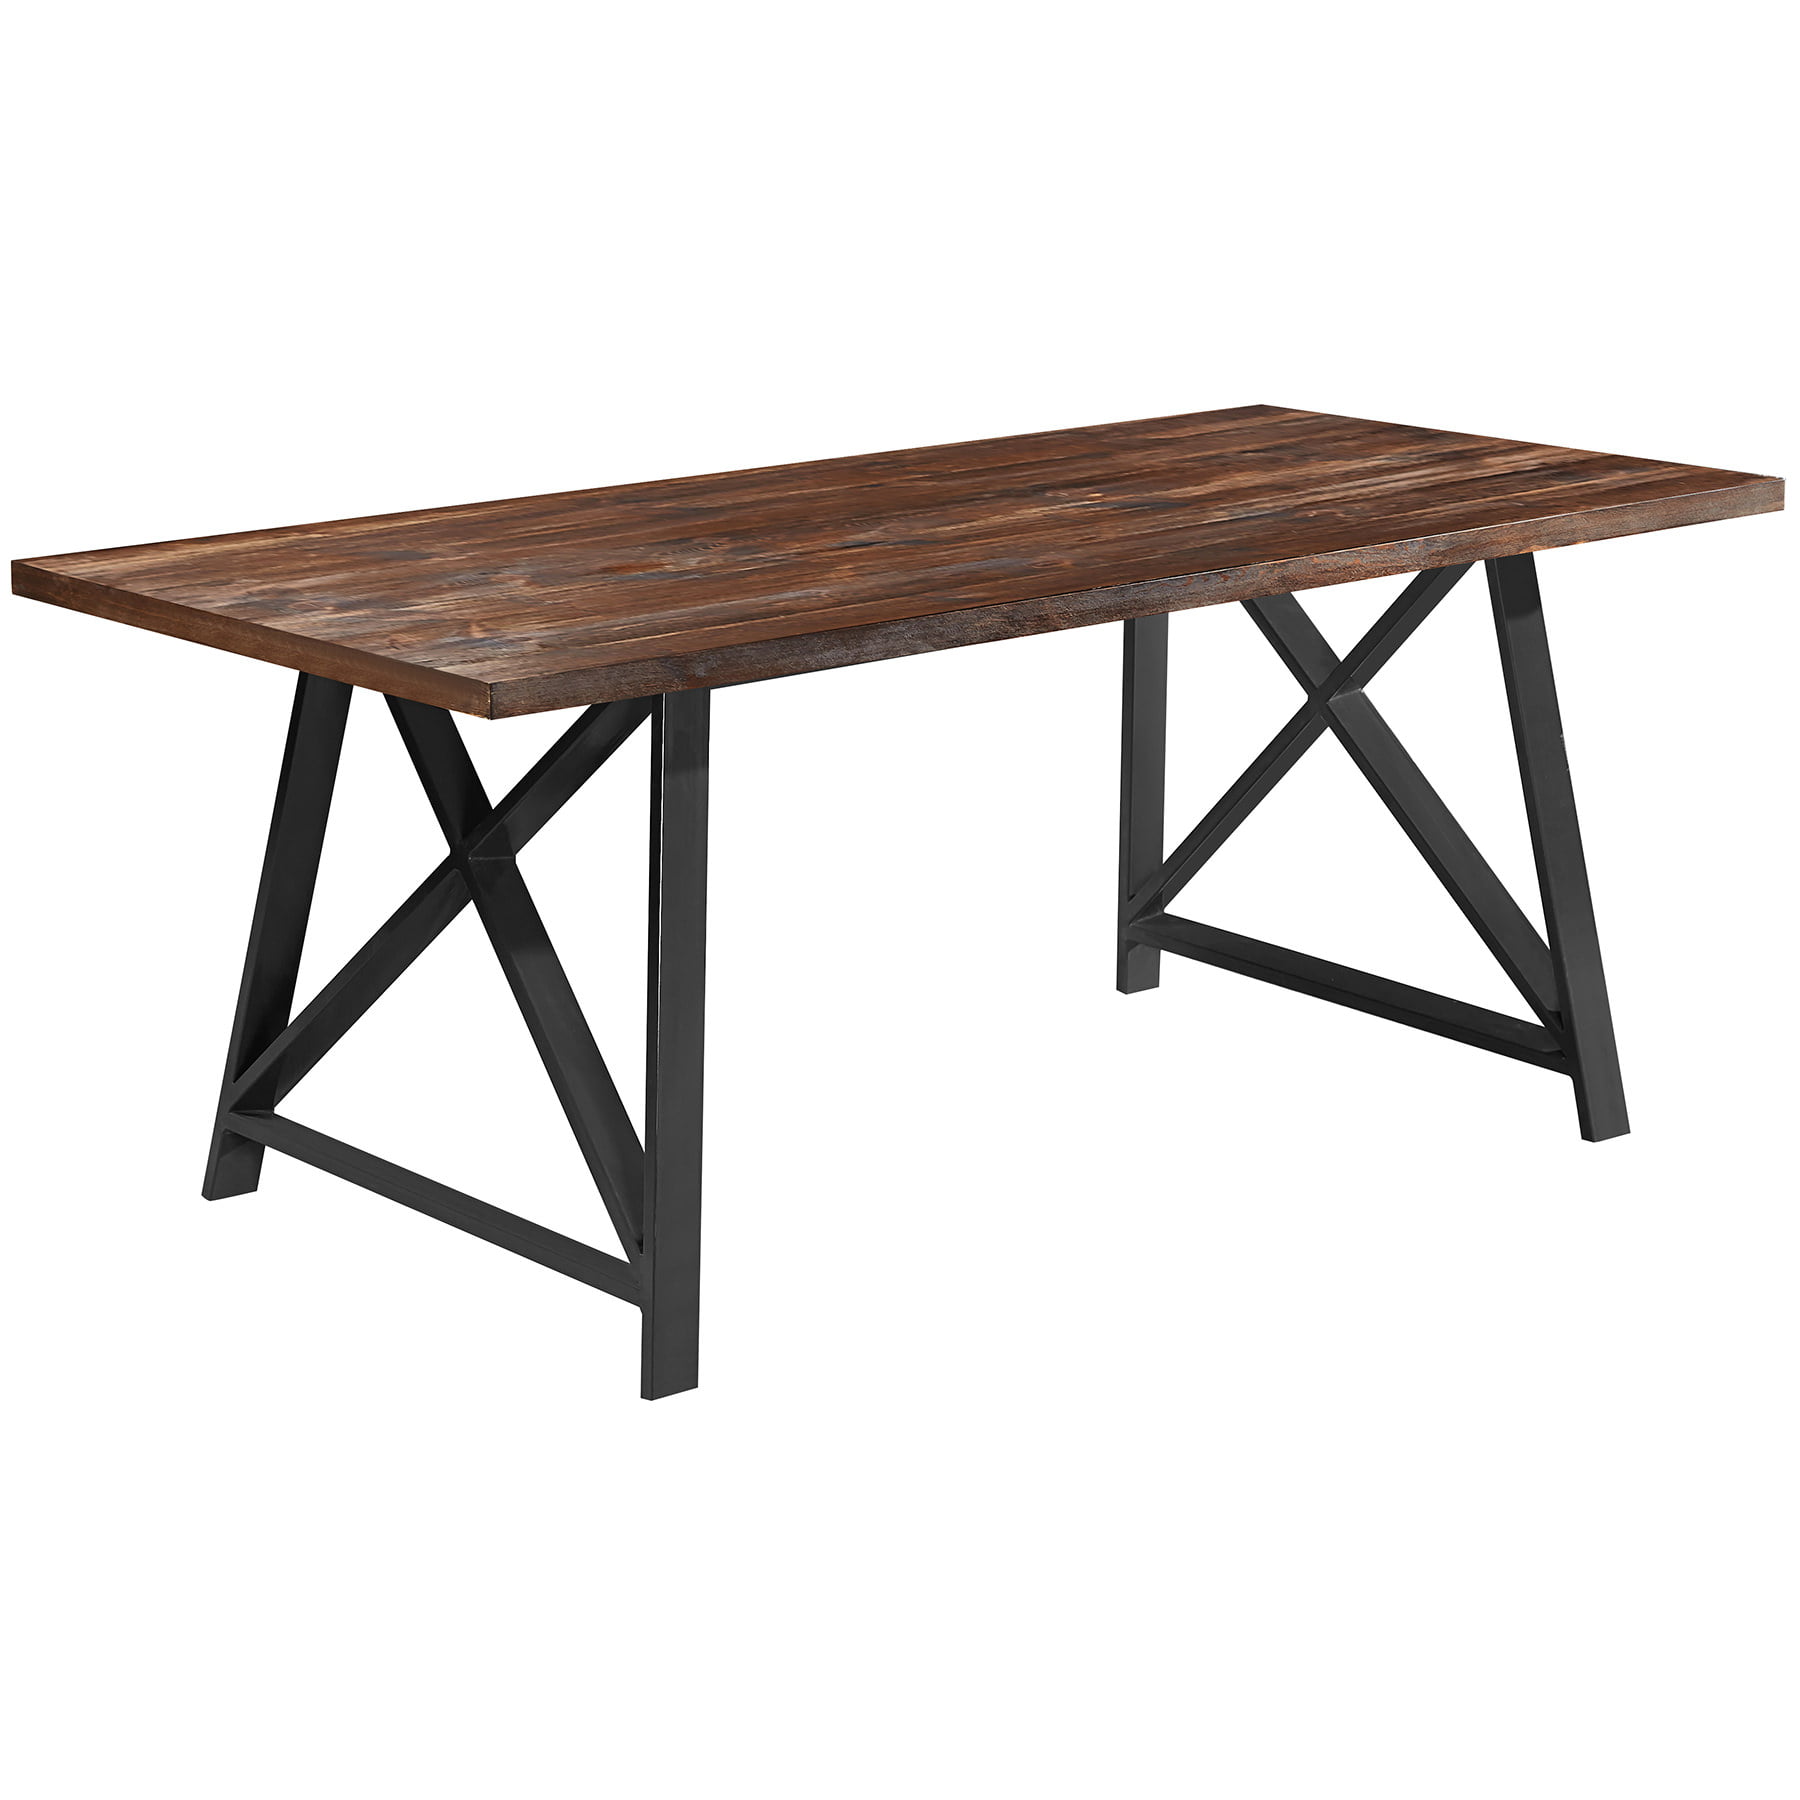 2xhome - Dark Wood - Modern Wood Table Grey Steel Metal Legs Frame Dining Table 71" inches ...